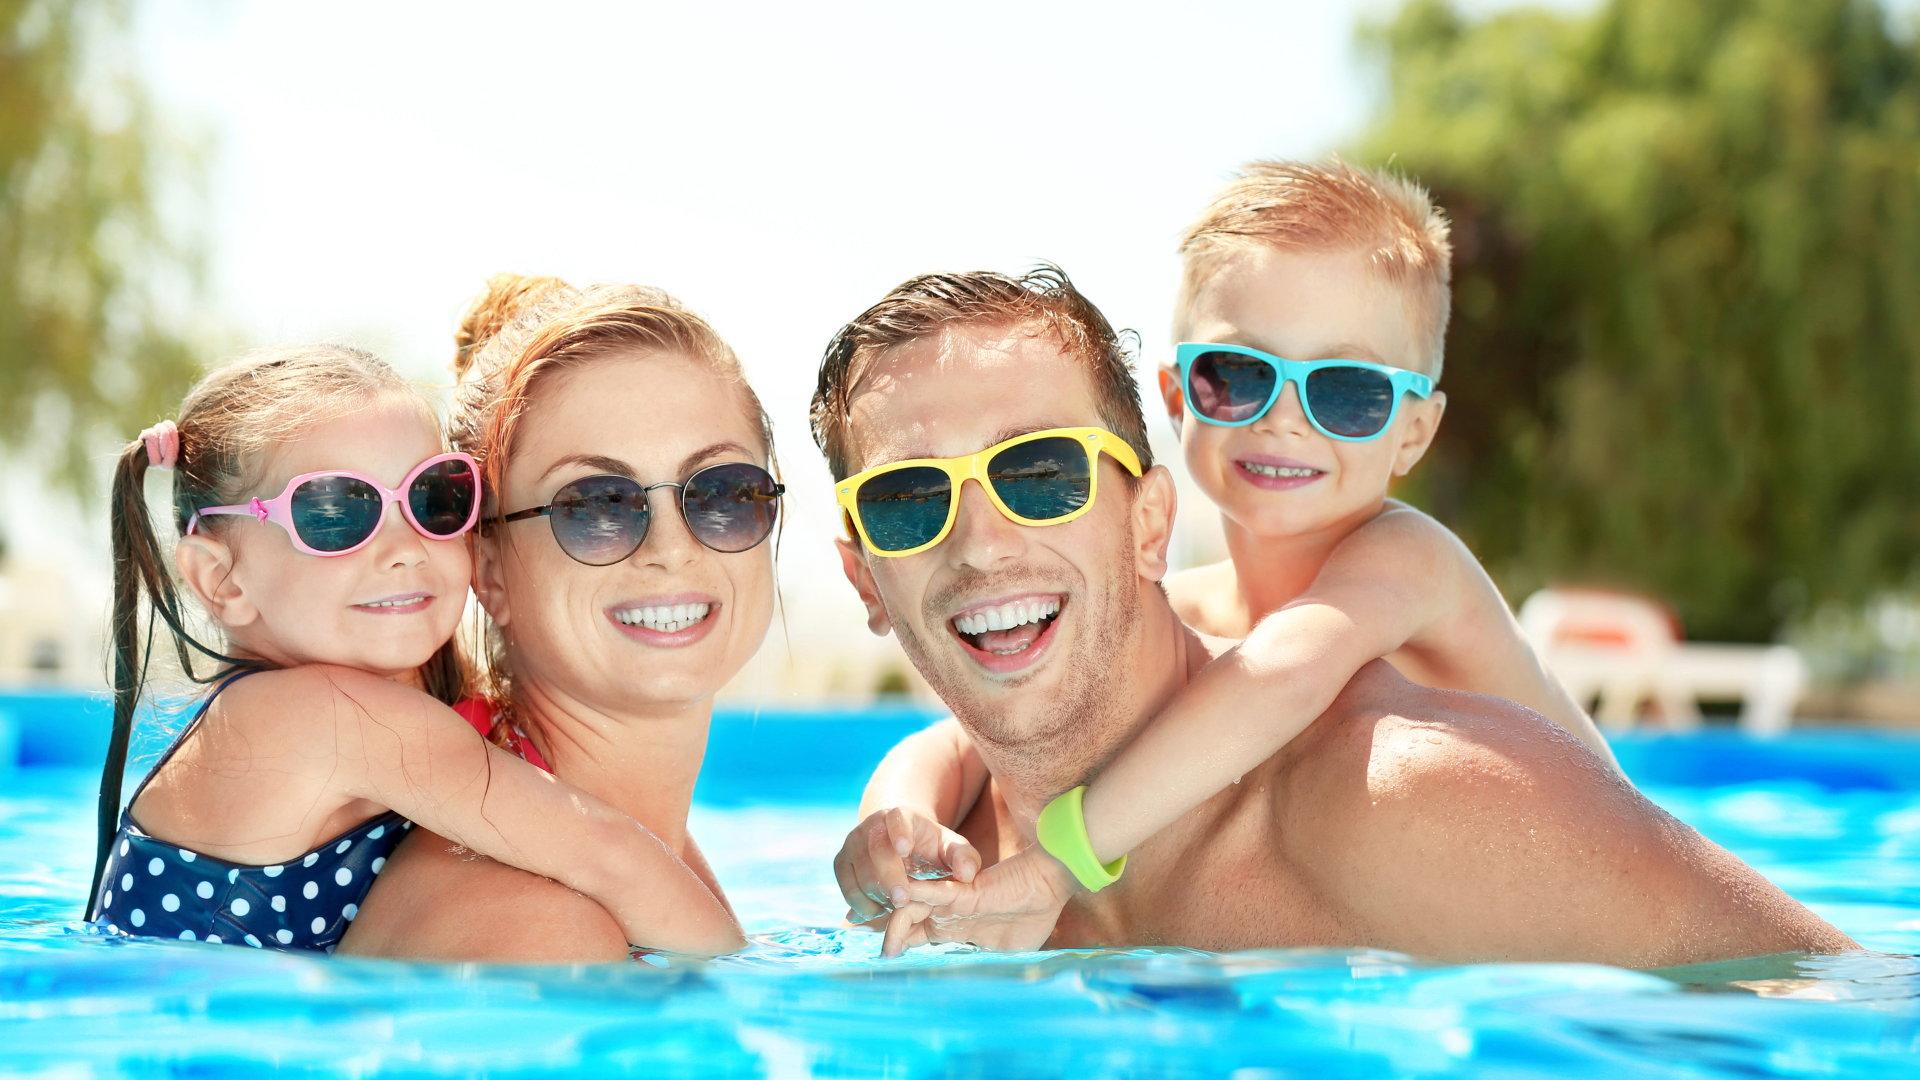 mom, dad and two kids together in pool